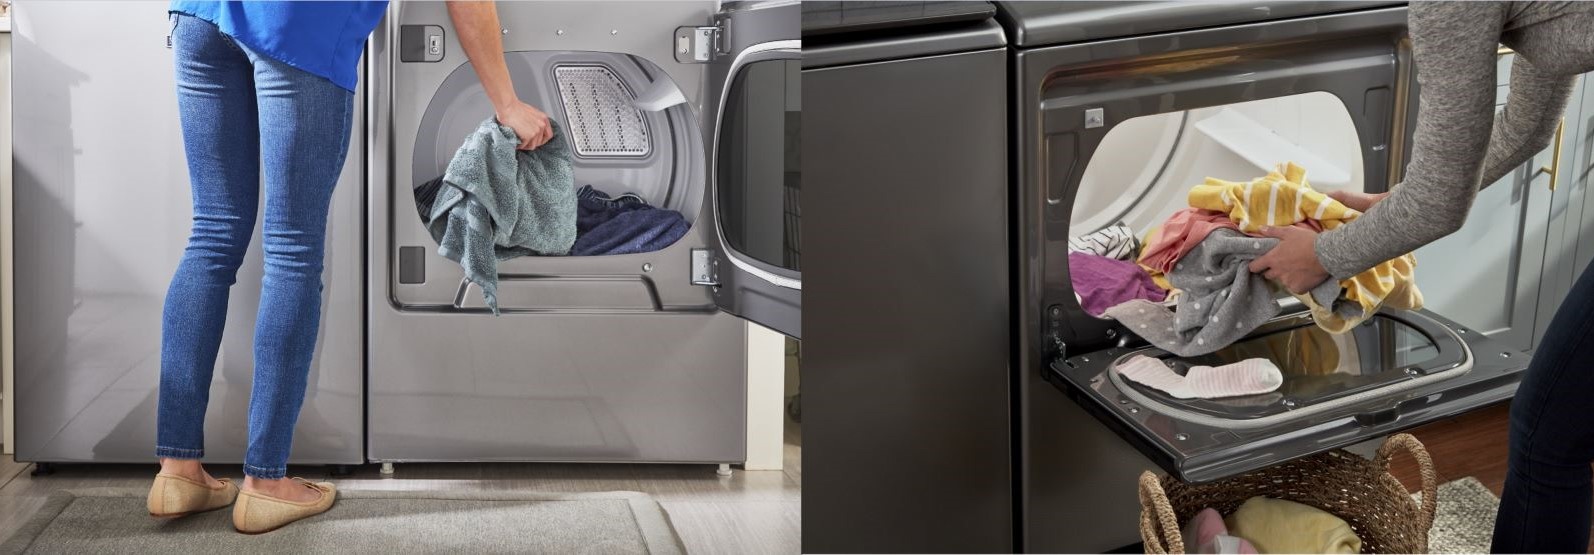 side-by-side images of Maytag and Whirlpool clothes dryers